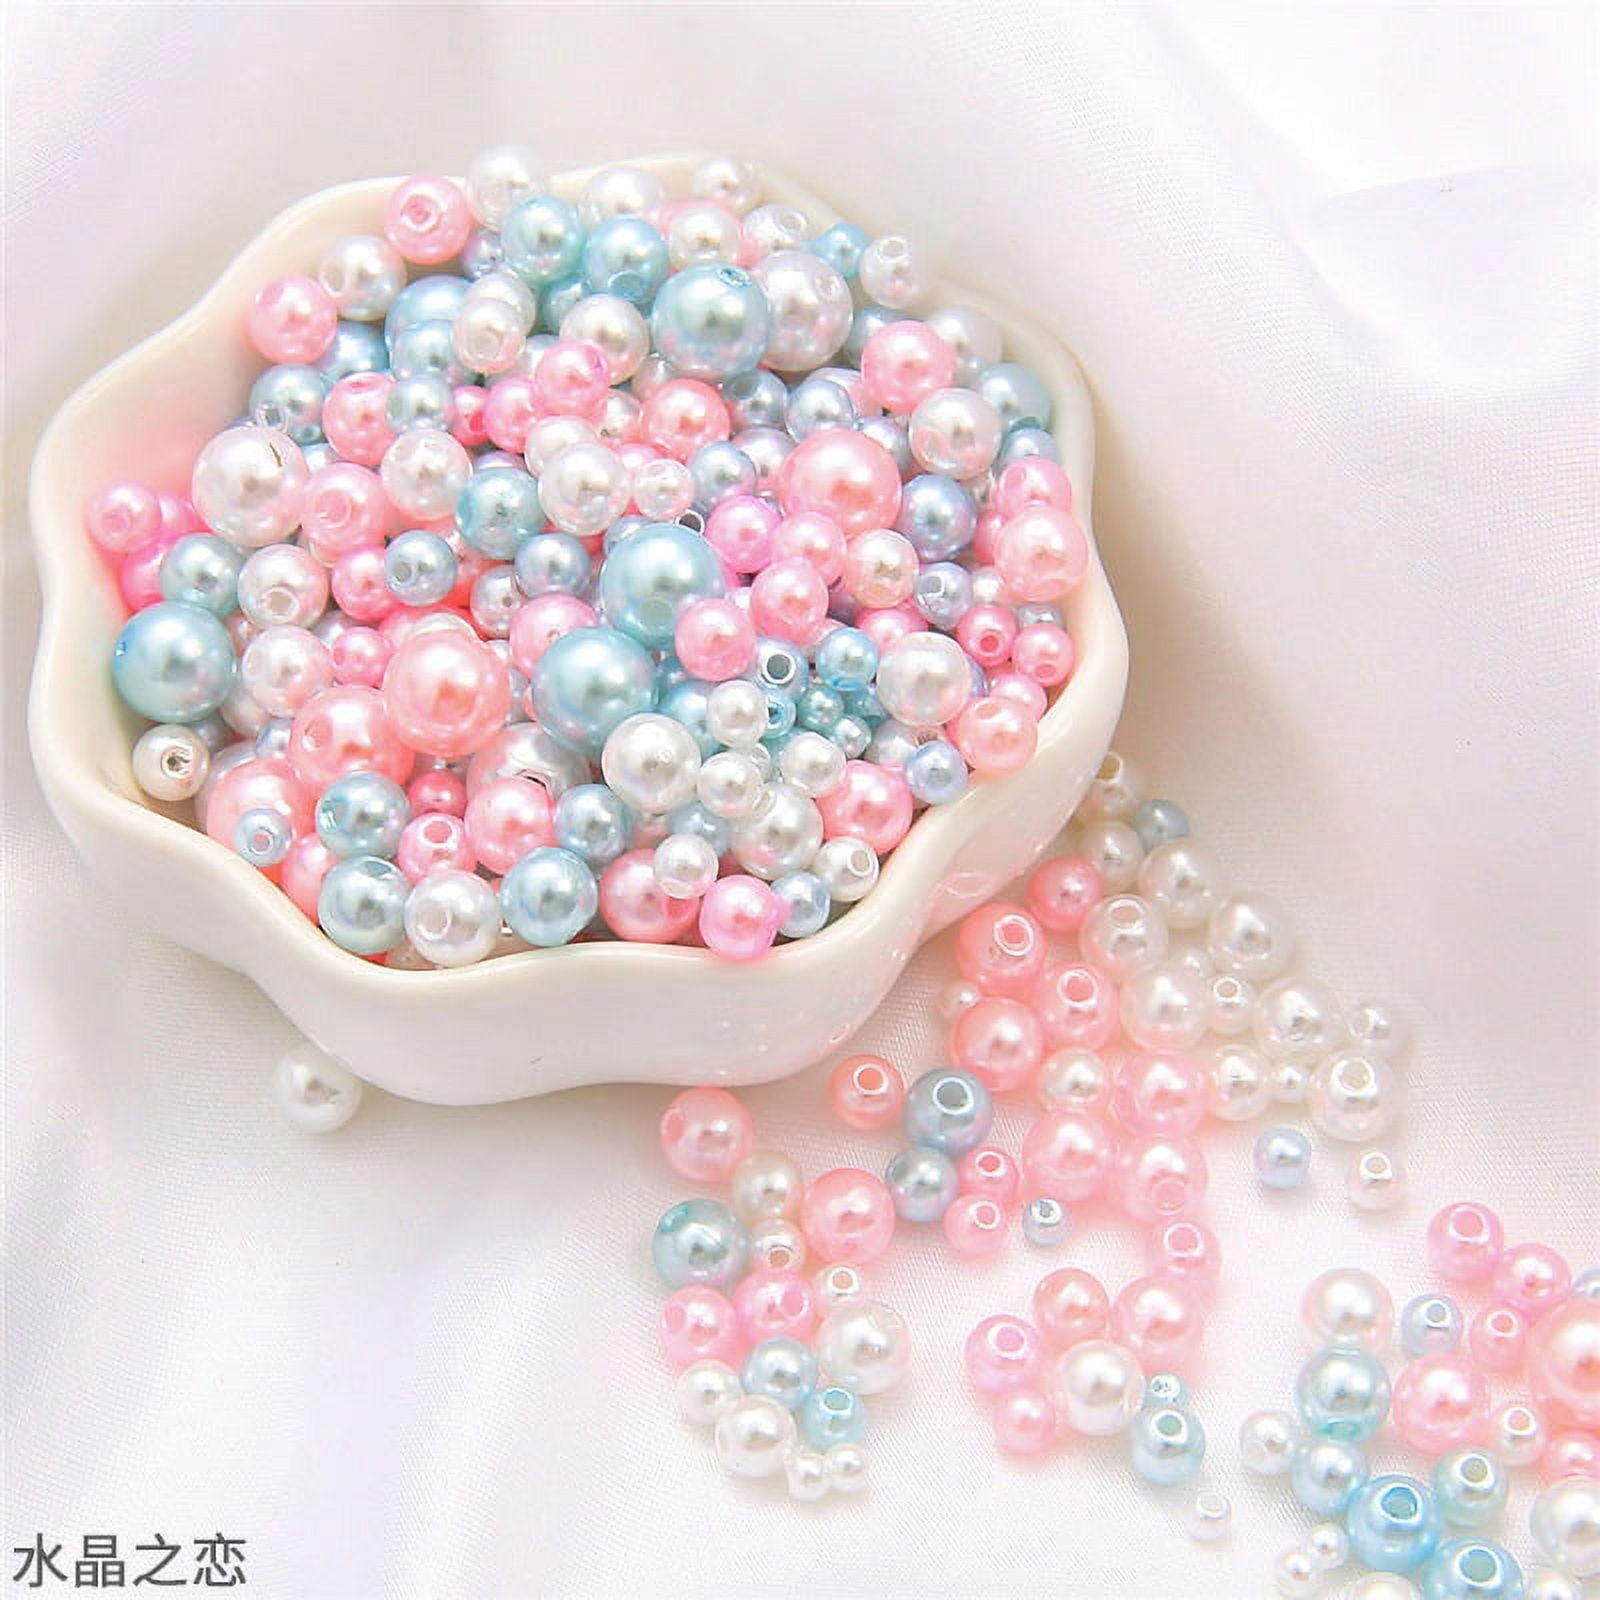 Pearl Beads for Jewelry Making, 8MM 32Colors Round Pearls Beads with Holes,  1000Pcs Handcrafted Colorful Loose Spacer Beads Small Filler Beads for DIY